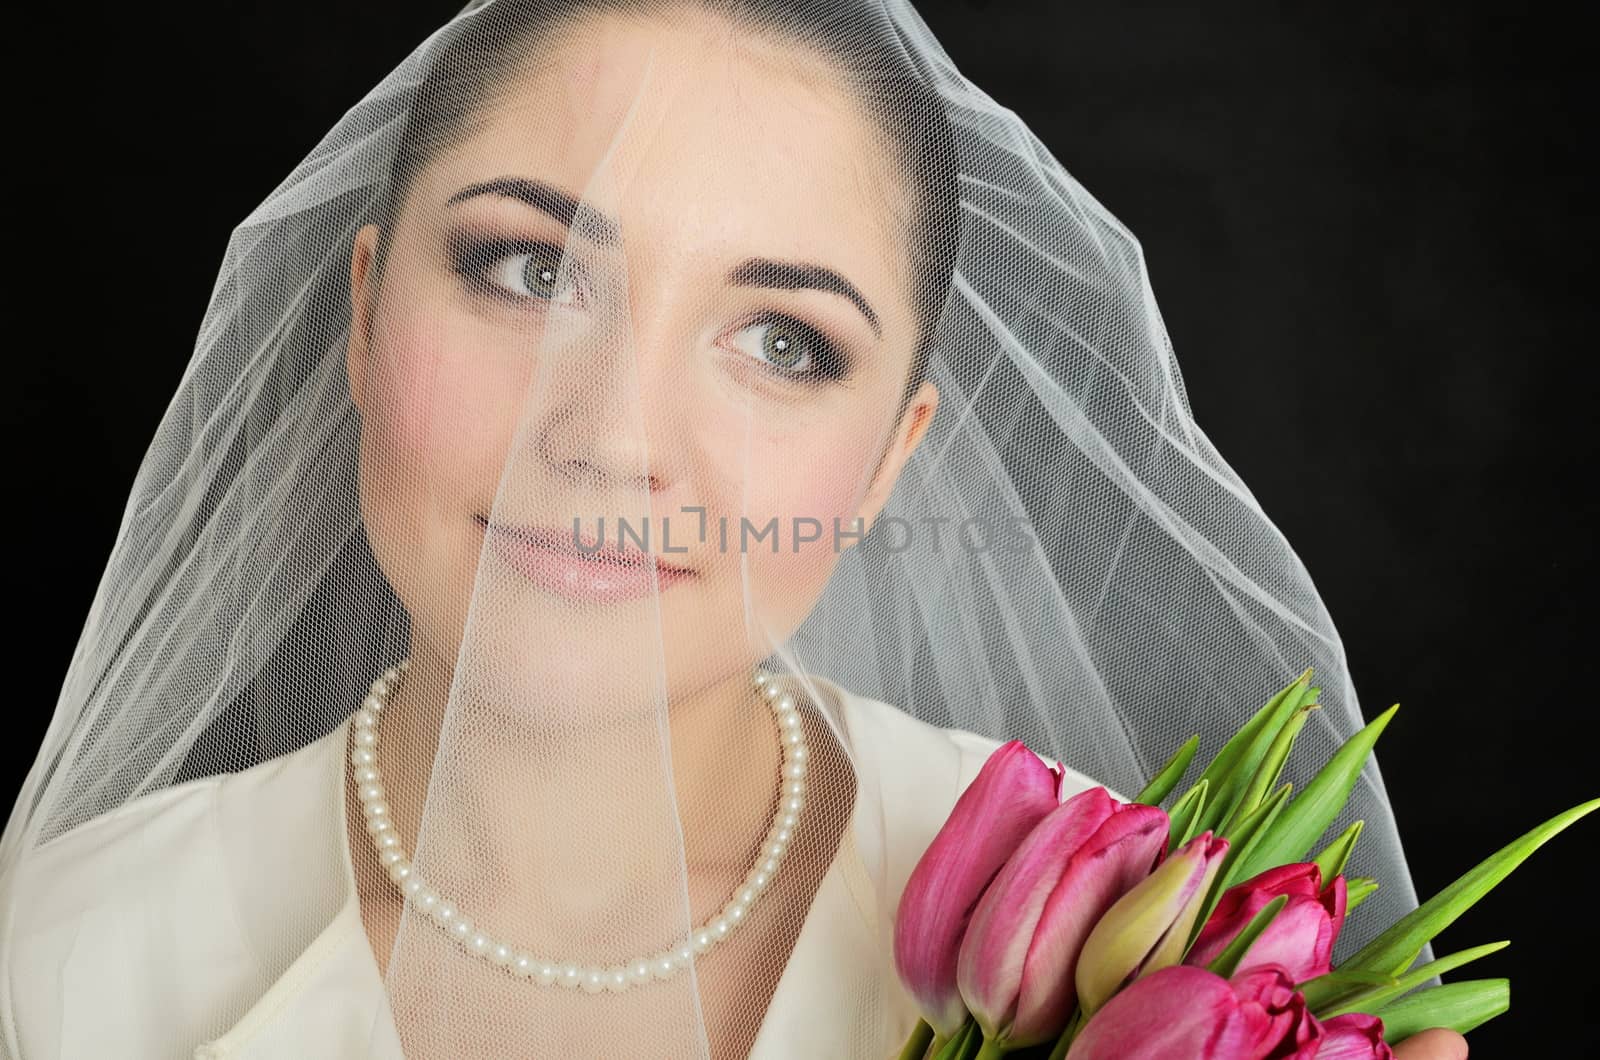 Female model, face covered with veil. Bride holds tulips bouquet. Portrait in studio with black background.
